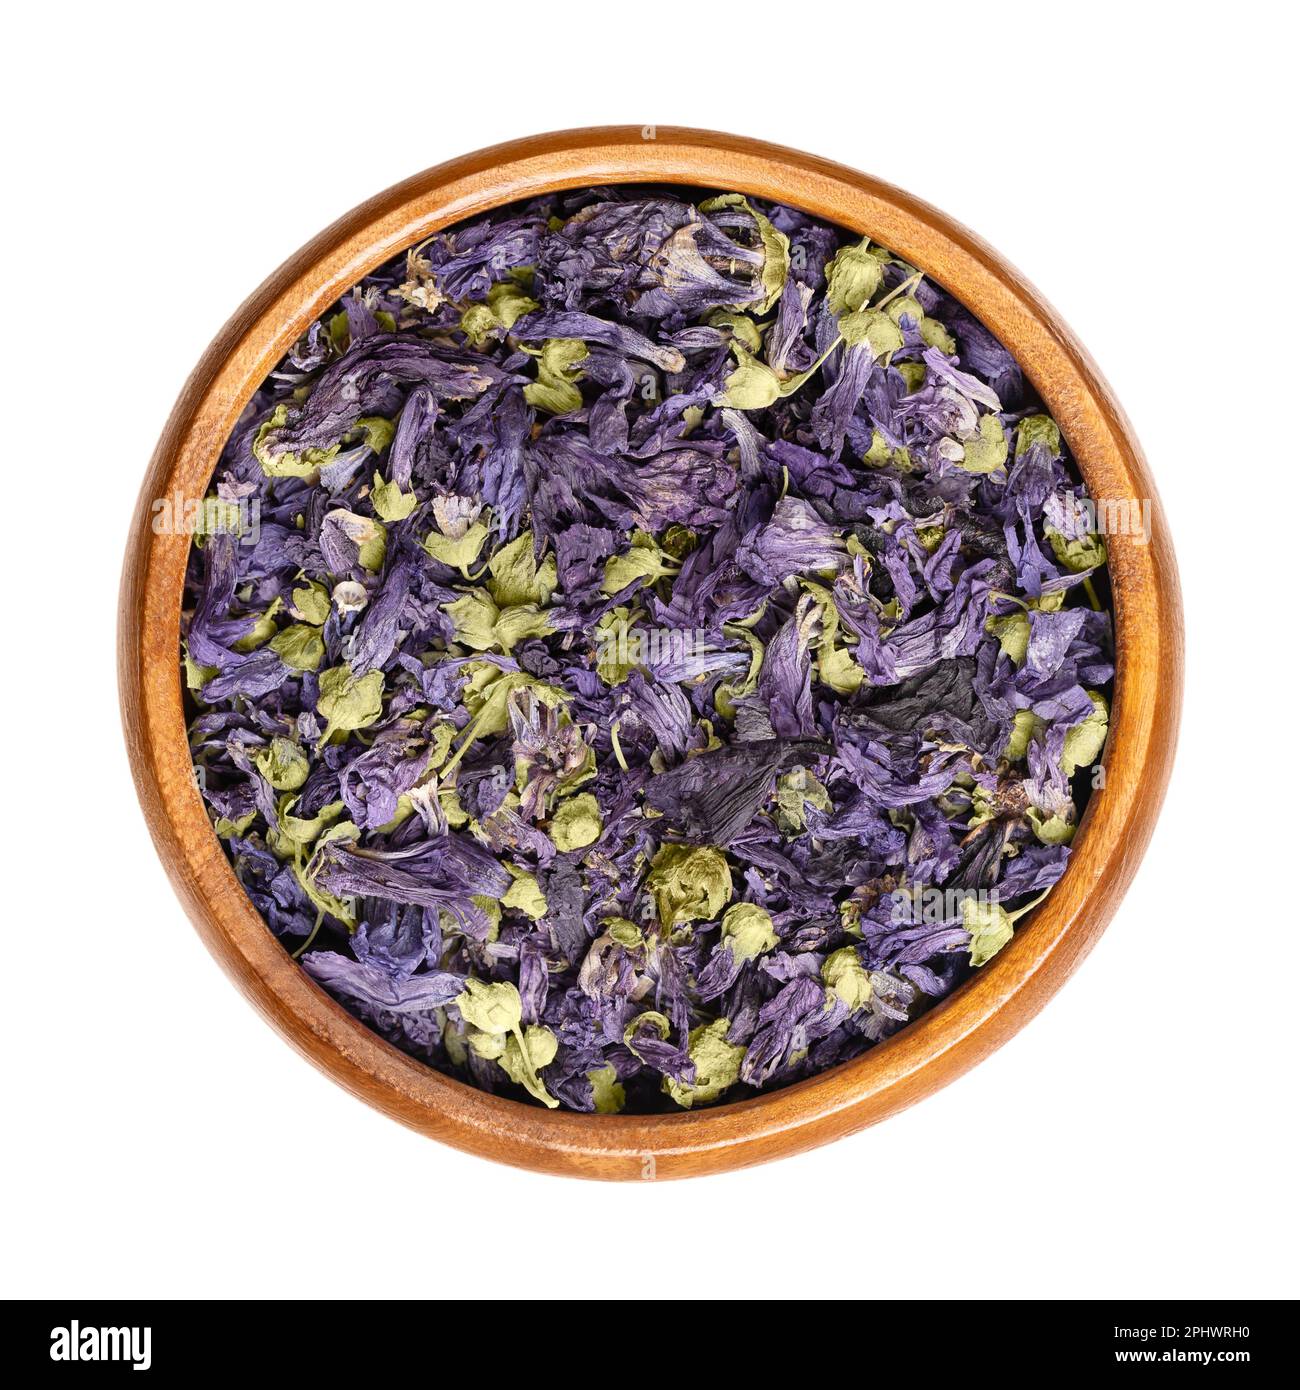 Dried purple mallow tea flowers, in a wooden bowl. Mauve-purple flower heads of Malva sylvestris, also known as common mallow, used for herbal tea. Stock Photo